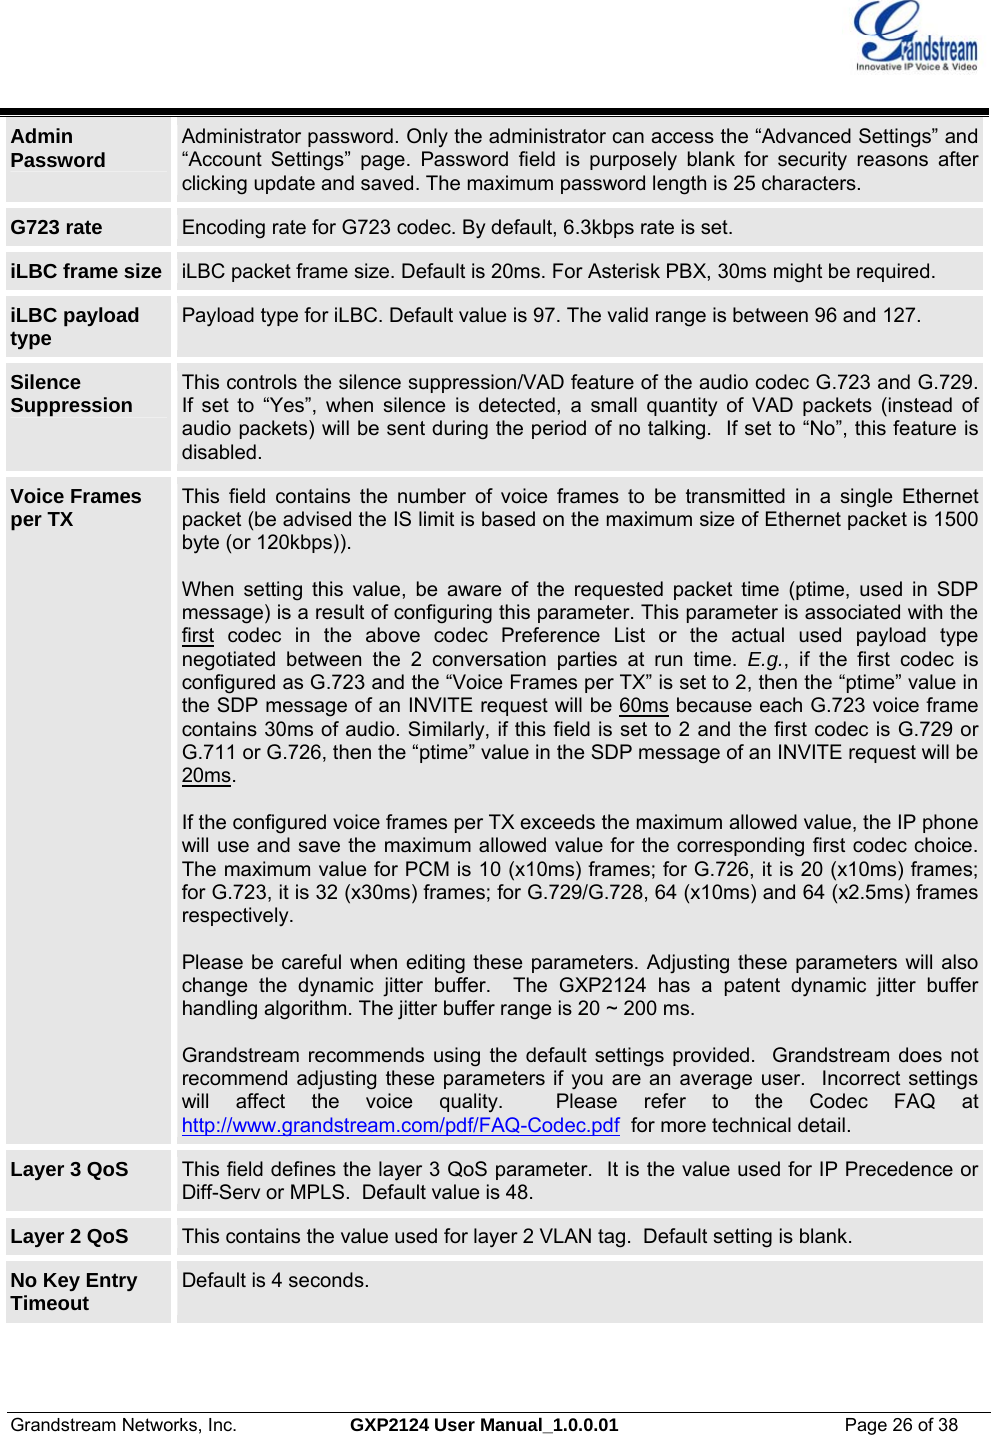  Grandstream Networks, Inc.  GXP2124 User Manual_1.0.0.01  Page 26 of 38                                                                                                                      Admin  Password  Administrator password. Only the administrator can access the “Advanced Settings” and “Account Settings” page. Password field is purposely blank for security reasons after clicking update and saved. The maximum password length is 25 characters. G723 rate  Encoding rate for G723 codec. By default, 6.3kbps rate is set. iLBC frame size  iLBC packet frame size. Default is 20ms. For Asterisk PBX, 30ms might be required. iLBC payload type  Payload type for iLBC. Default value is 97. The valid range is between 96 and 127.  Silence Suppression  This controls the silence suppression/VAD feature of the audio codec G.723 and G.729. If set to “Yes”, when silence is detected, a small quantity of VAD packets (instead of audio packets) will be sent during the period of no talking.  If set to “No”, this feature is disabled. Voice Frames per TX  This field contains the number of voice frames to be transmitted in a single Ethernet packet (be advised the IS limit is based on the maximum size of Ethernet packet is 1500 byte (or 120kbps)).   When setting this value, be aware of the requested packet time (ptime, used in SDP message) is a result of configuring this parameter. This parameter is associated with the first codec in the above codec Preference List or the actual used payload type negotiated between the 2 conversation parties at run time. E.g., if the first codec is configured as G.723 and the “Voice Frames per TX” is set to 2, then the “ptime” value in the SDP message of an INVITE request will be 60ms because each G.723 voice frame contains 30ms of audio. Similarly, if this field is set to 2 and the first codec is G.729 or G.711 or G.726, then the “ptime” value in the SDP message of an INVITE request will be 20ms.  If the configured voice frames per TX exceeds the maximum allowed value, the IP phone will use and save the maximum allowed value for the corresponding first codec choice. The maximum value for PCM is 10 (x10ms) frames; for G.726, it is 20 (x10ms) frames; for G.723, it is 32 (x30ms) frames; for G.729/G.728, 64 (x10ms) and 64 (x2.5ms) frames respectively.   Please be careful when editing these parameters. Adjusting these parameters will also change the dynamic jitter buffer.  The GXP2124 has a patent dynamic jitter buffer handling algorithm. The jitter buffer range is 20 ~ 200 ms.  Grandstream recommends using the default settings provided.  Grandstream does not recommend adjusting these parameters if you are an average user.  Incorrect settings will affect the voice quality.  Please refer to the Codec FAQ at http://www.grandstream.com/pdf/FAQ-Codec.pdf  for more technical detail. Layer 3 QoS  This field defines the layer 3 QoS parameter.  It is the value used for IP Precedence or Diff-Serv or MPLS.  Default value is 48. Layer 2 QoS  This contains the value used for layer 2 VLAN tag.  Default setting is blank. No Key Entry Timeout  Default is 4 seconds.   